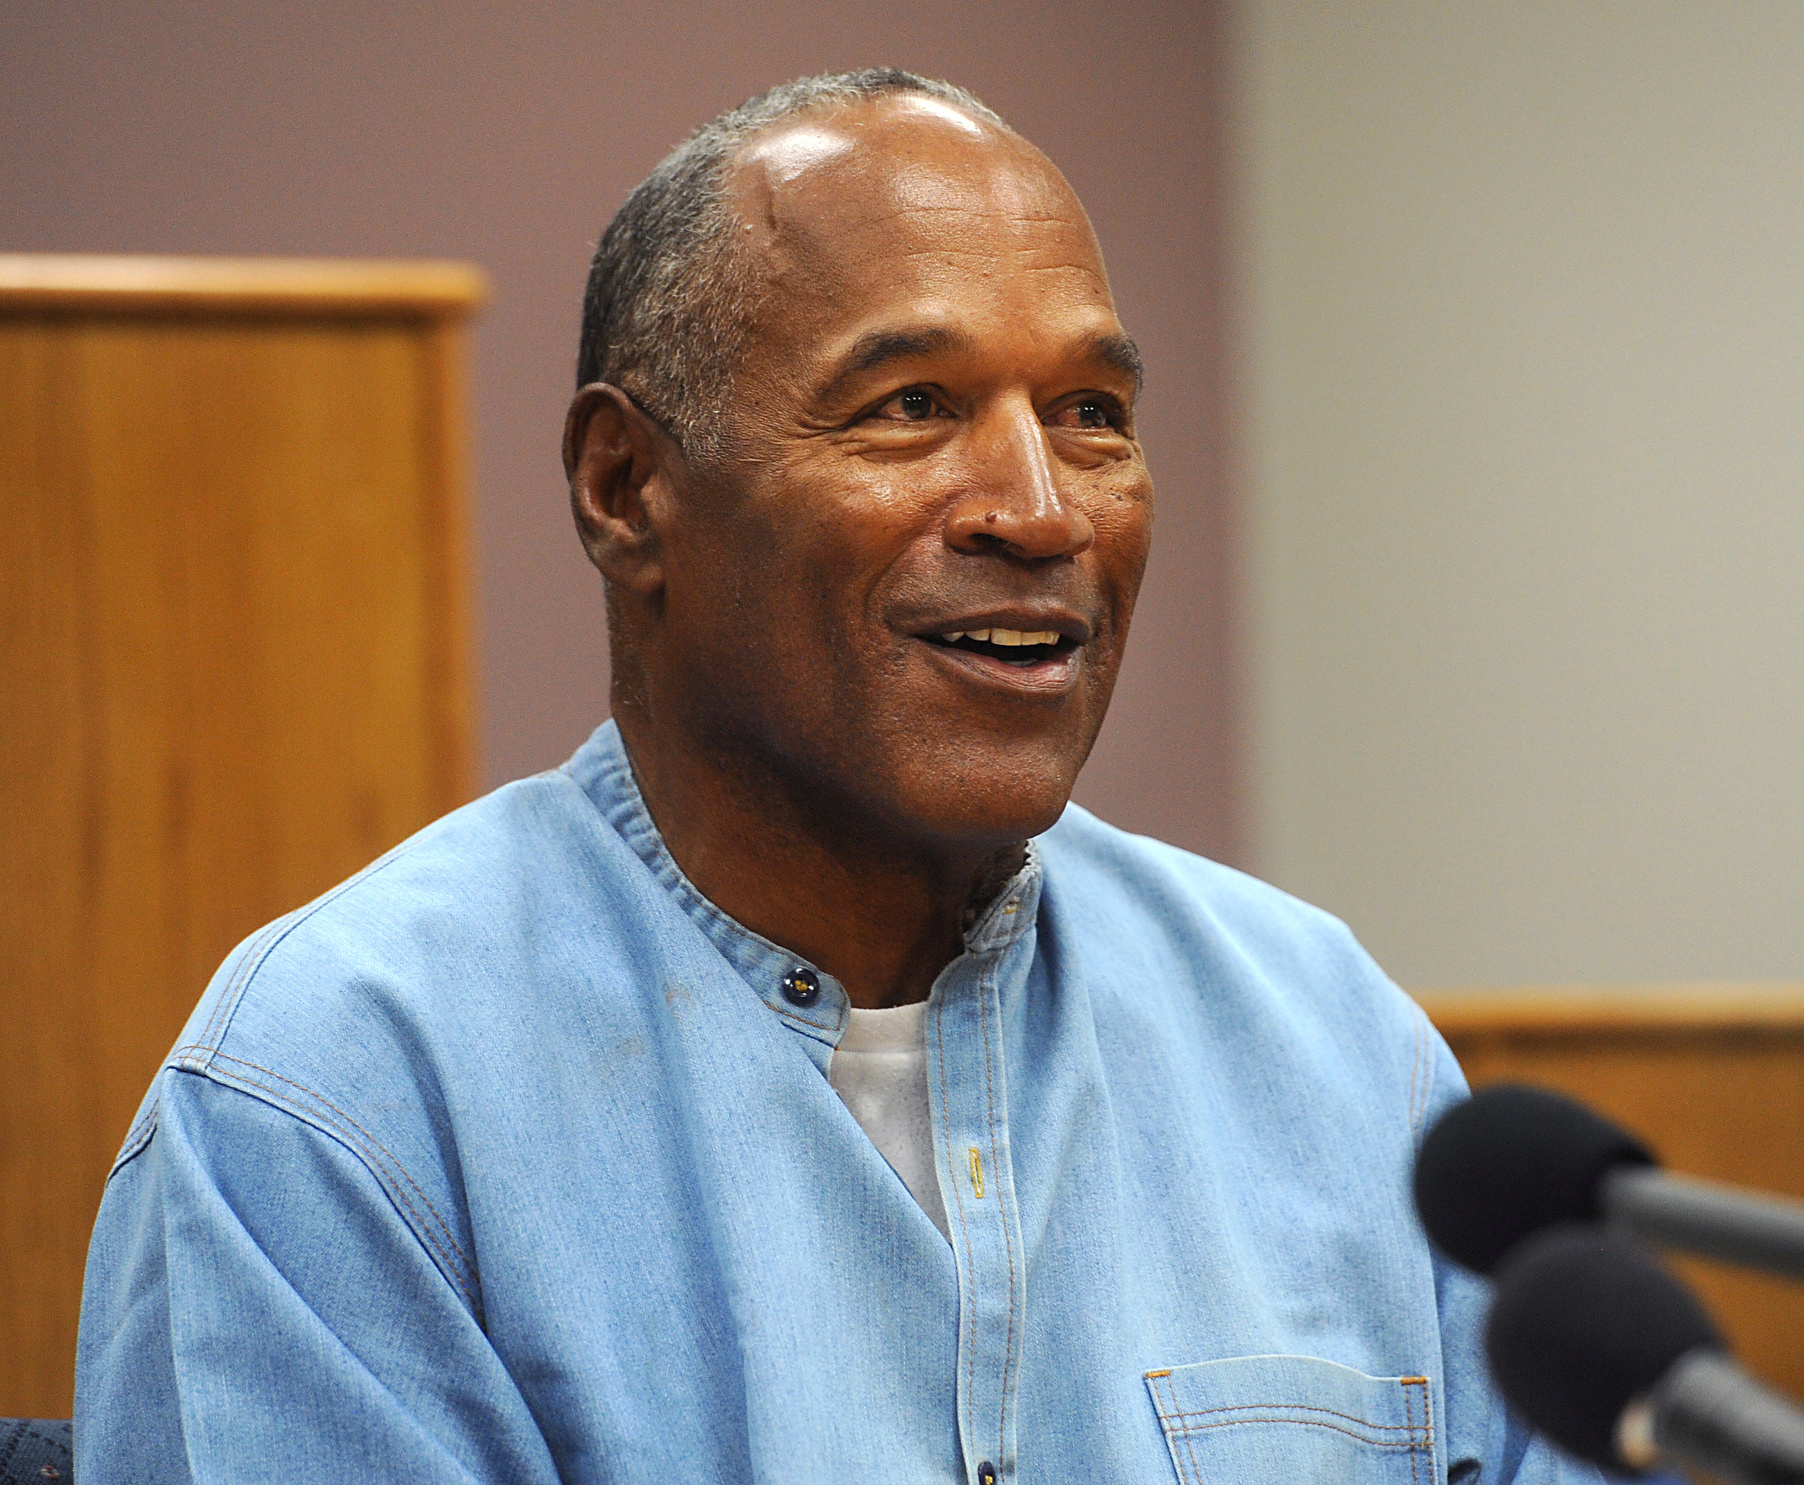 O.J. Simpson reacts during his parole hearing at Lovelock Correctional Center in Lovelock